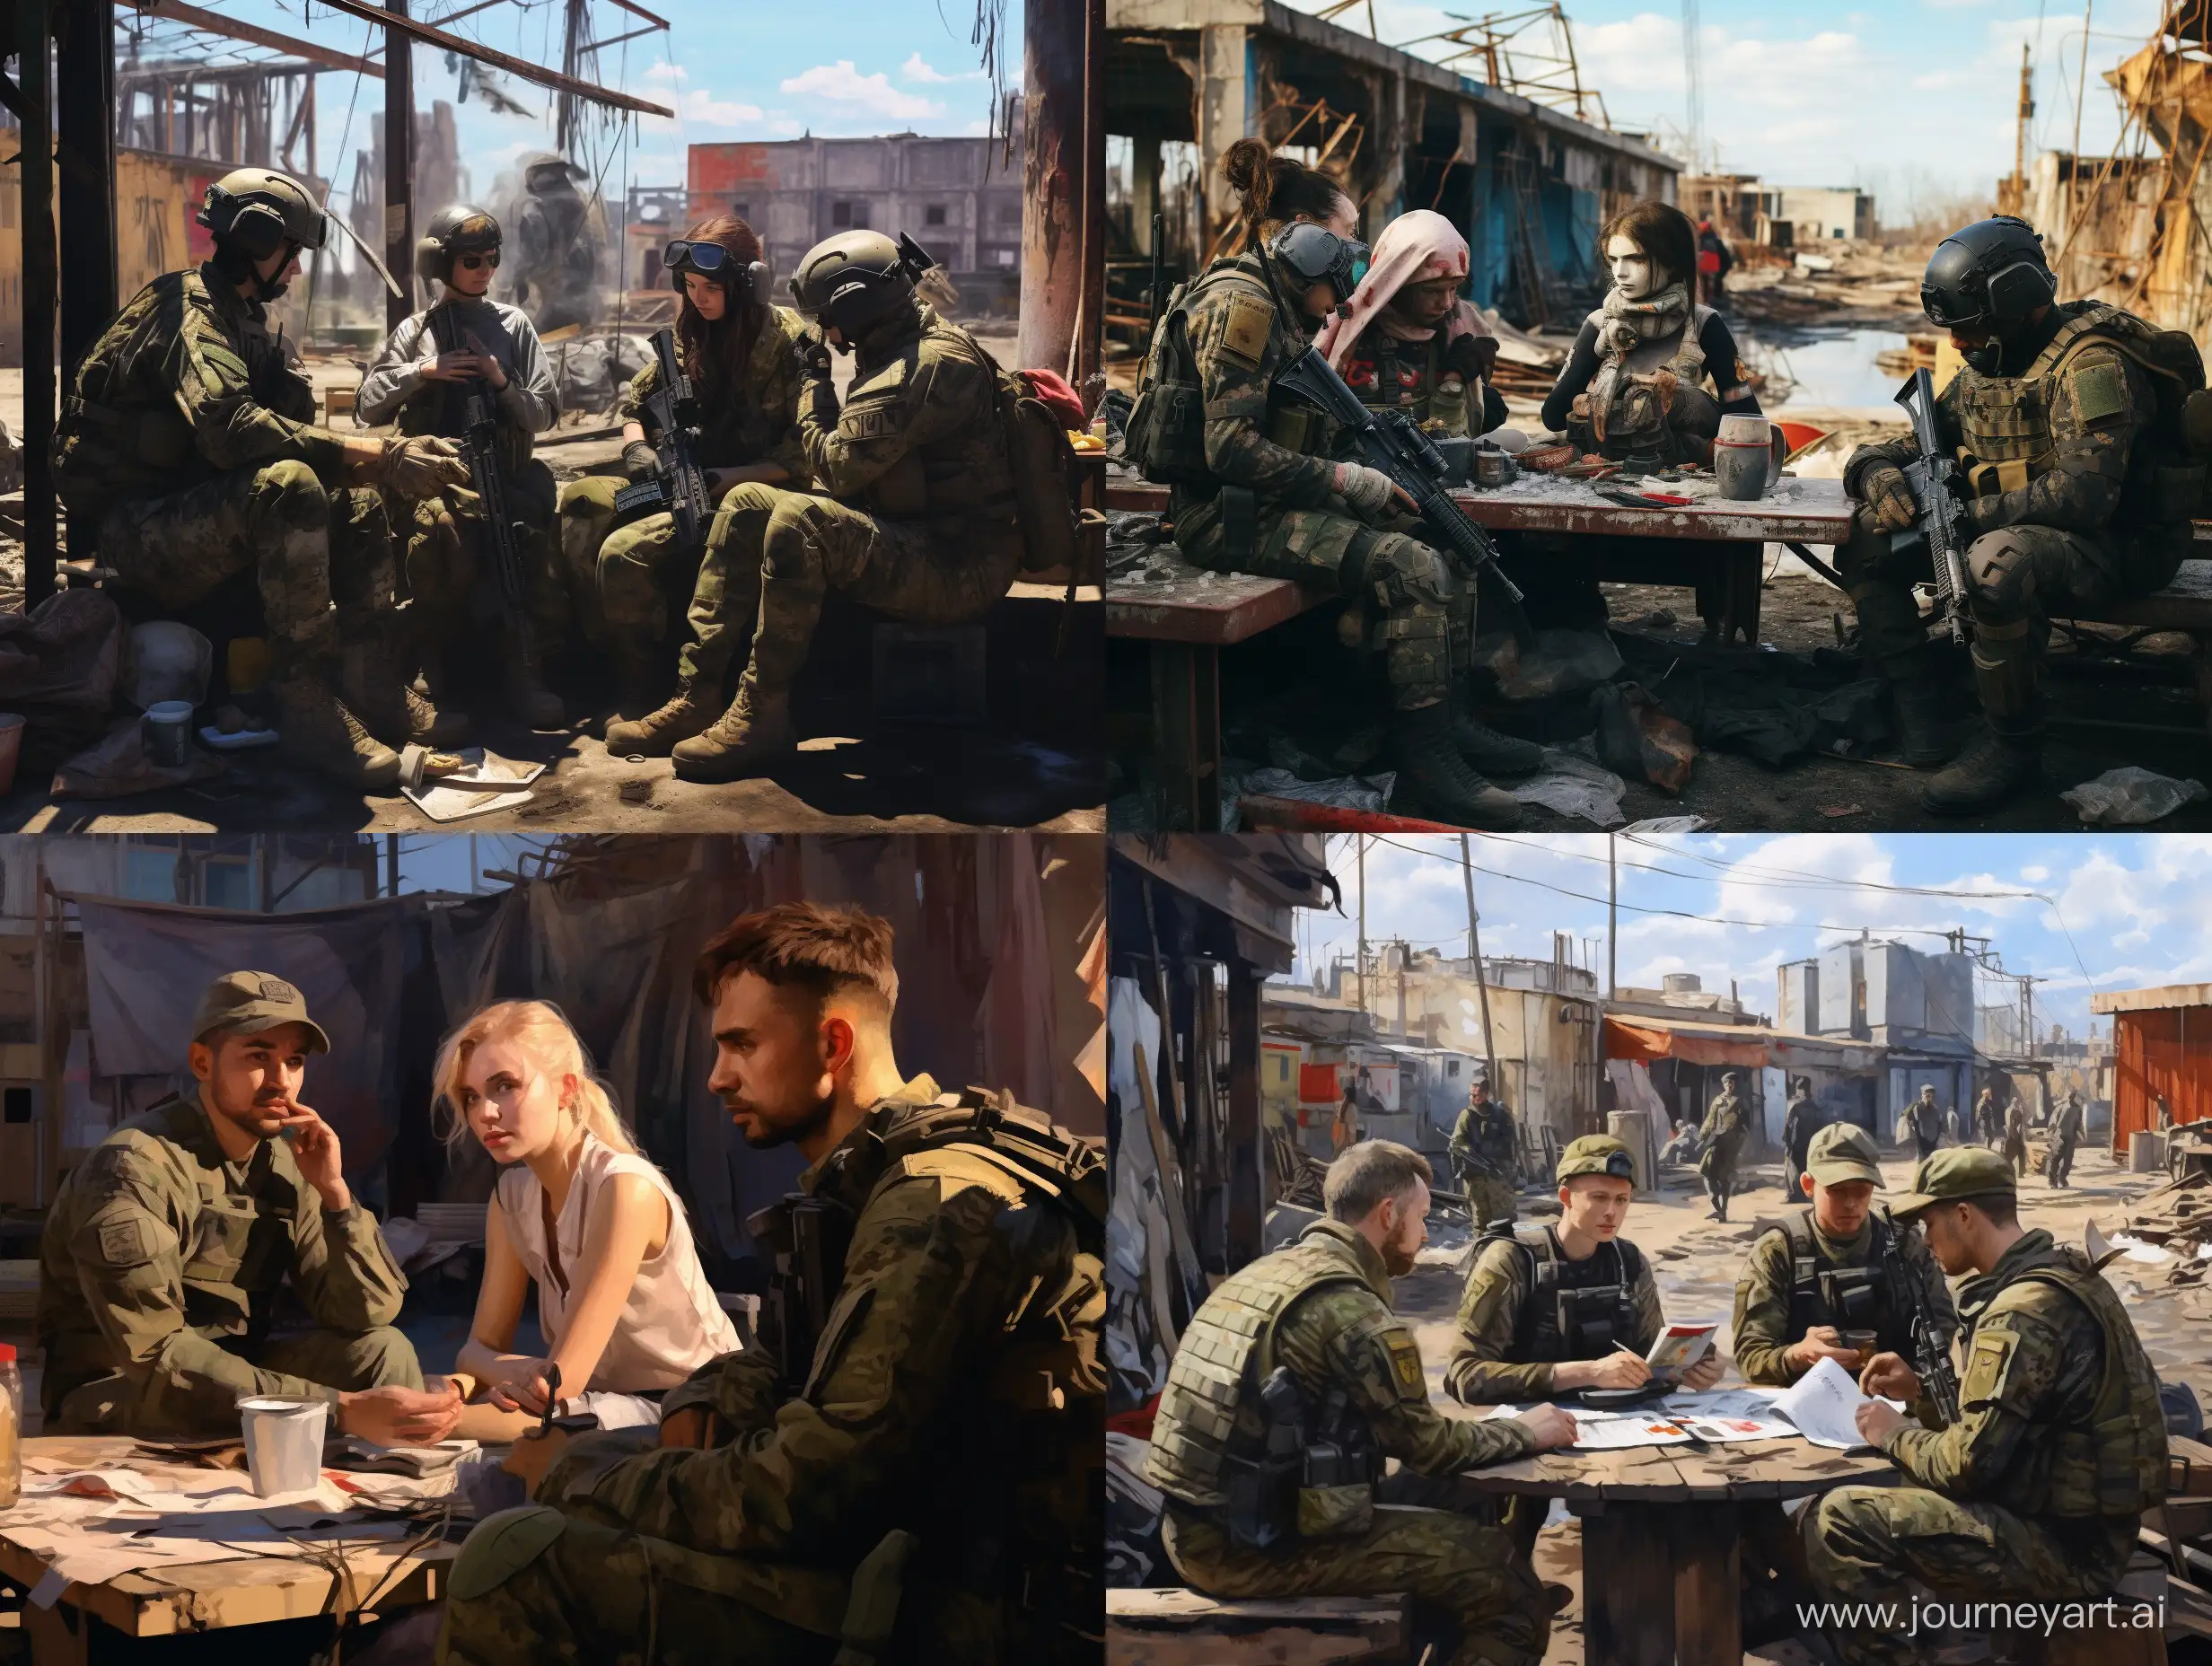 Image of a group of 4 Ukrainian heavy equipped male and female soliders recruits with helmet and camo battlesuit, sitting in wooden table outside in war torned wide drydocks liminal city, morning, showing their sense of humor, photography, male and female, with other many soldiers idling in the background